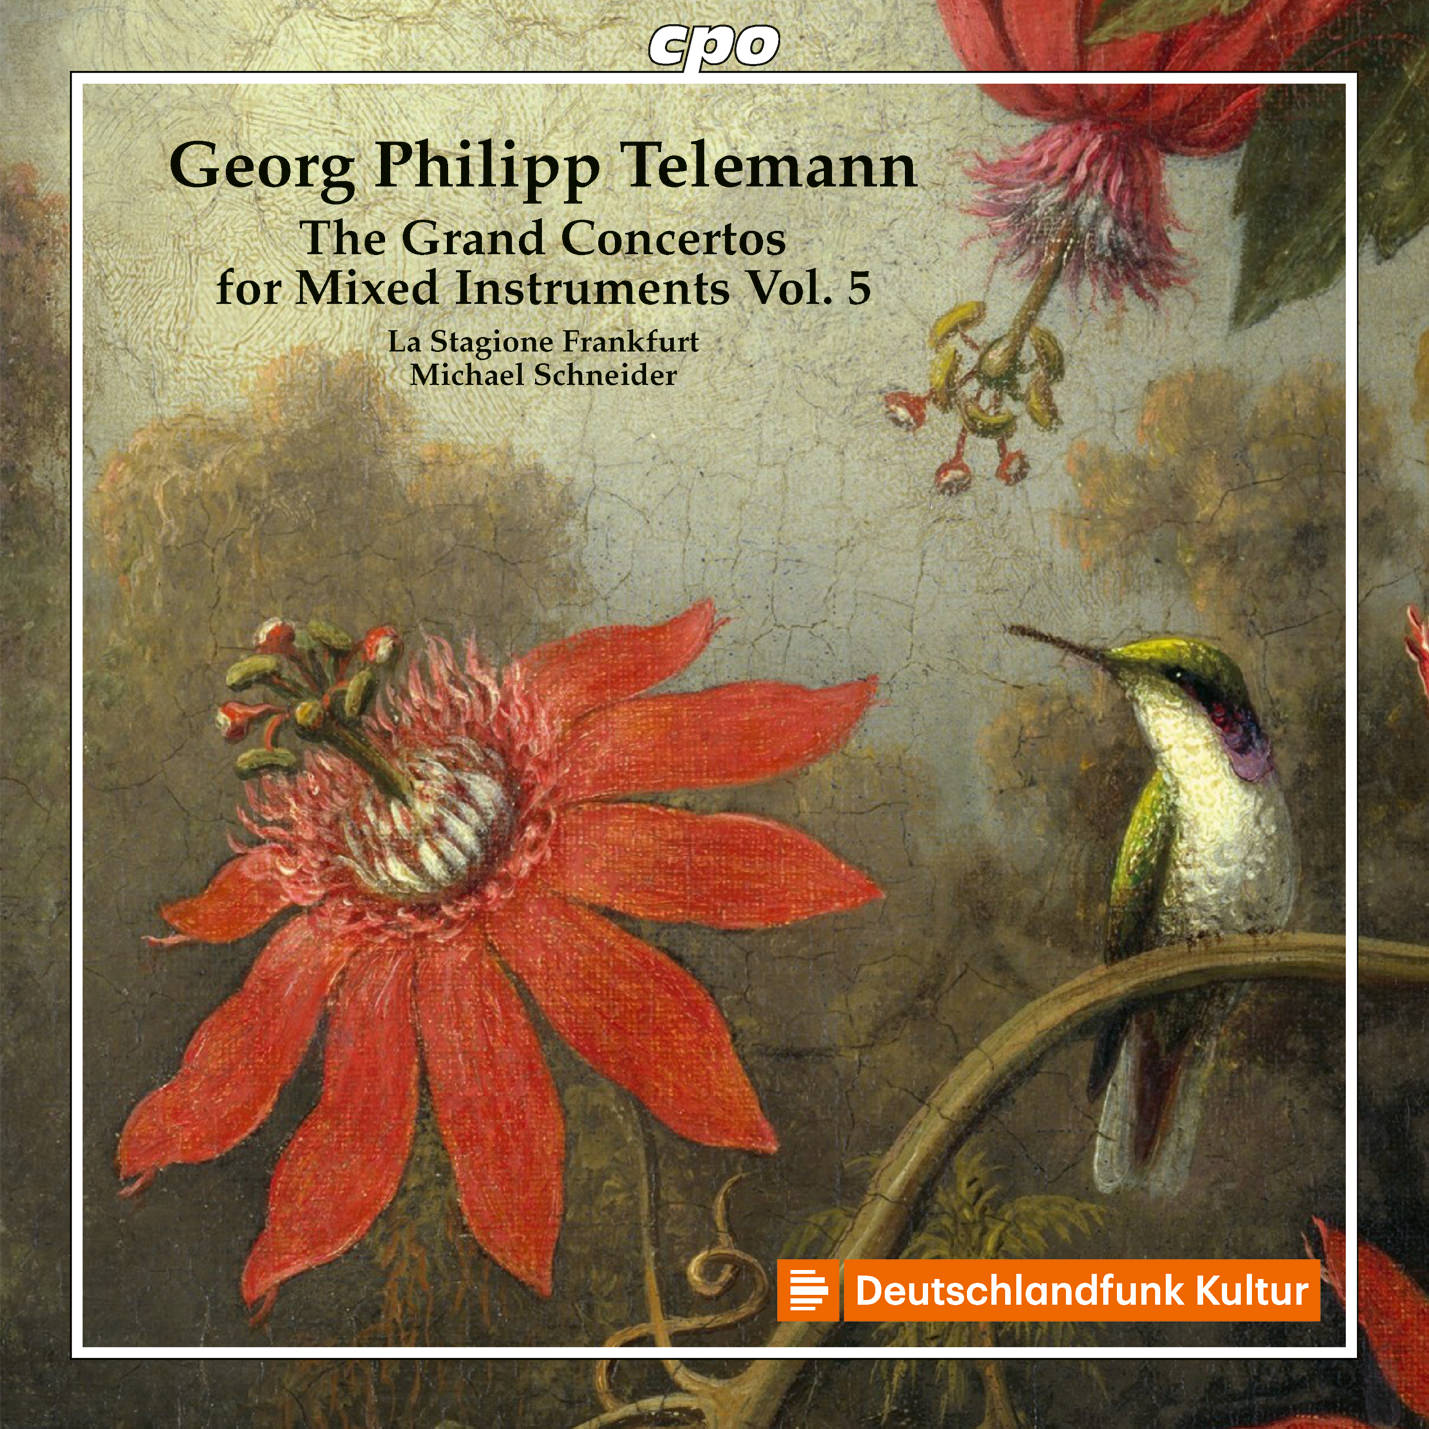 Telemann: The Grand Concertos for Mixed Instruments Vol. 5